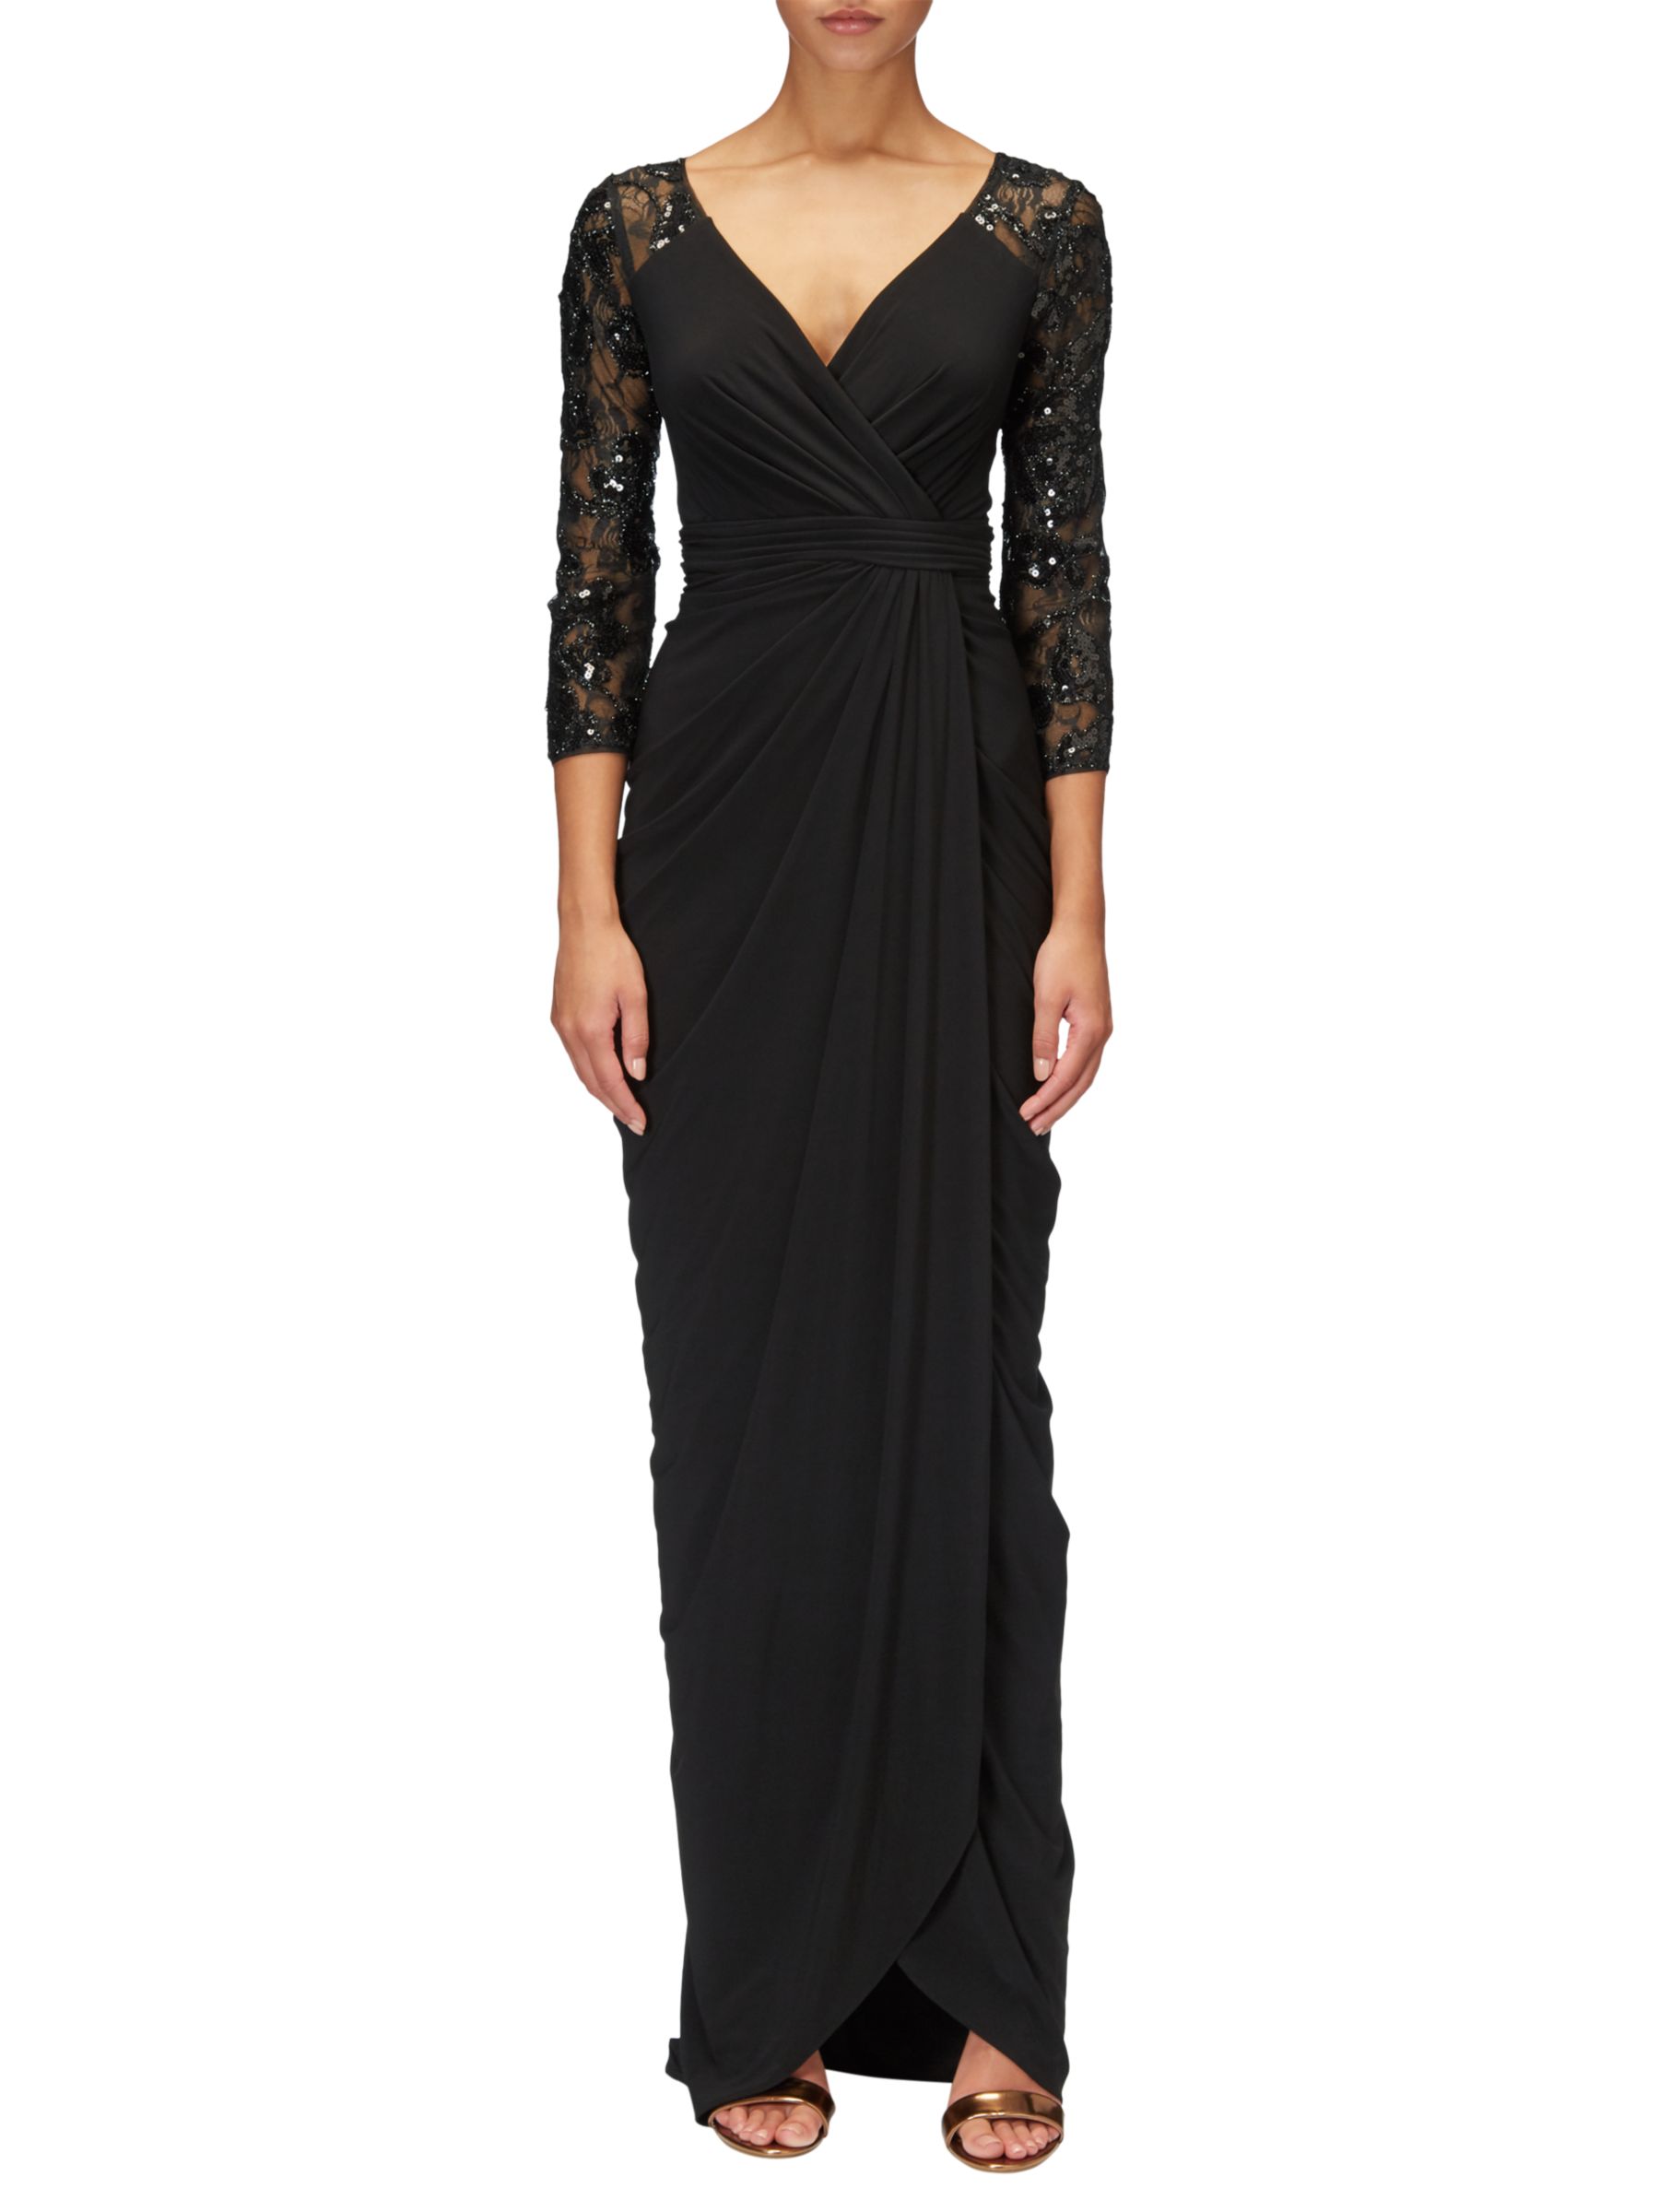 Adrianna Papell Plus Size Lace Sleeved Long Dress, Black at John Lewis & Partners